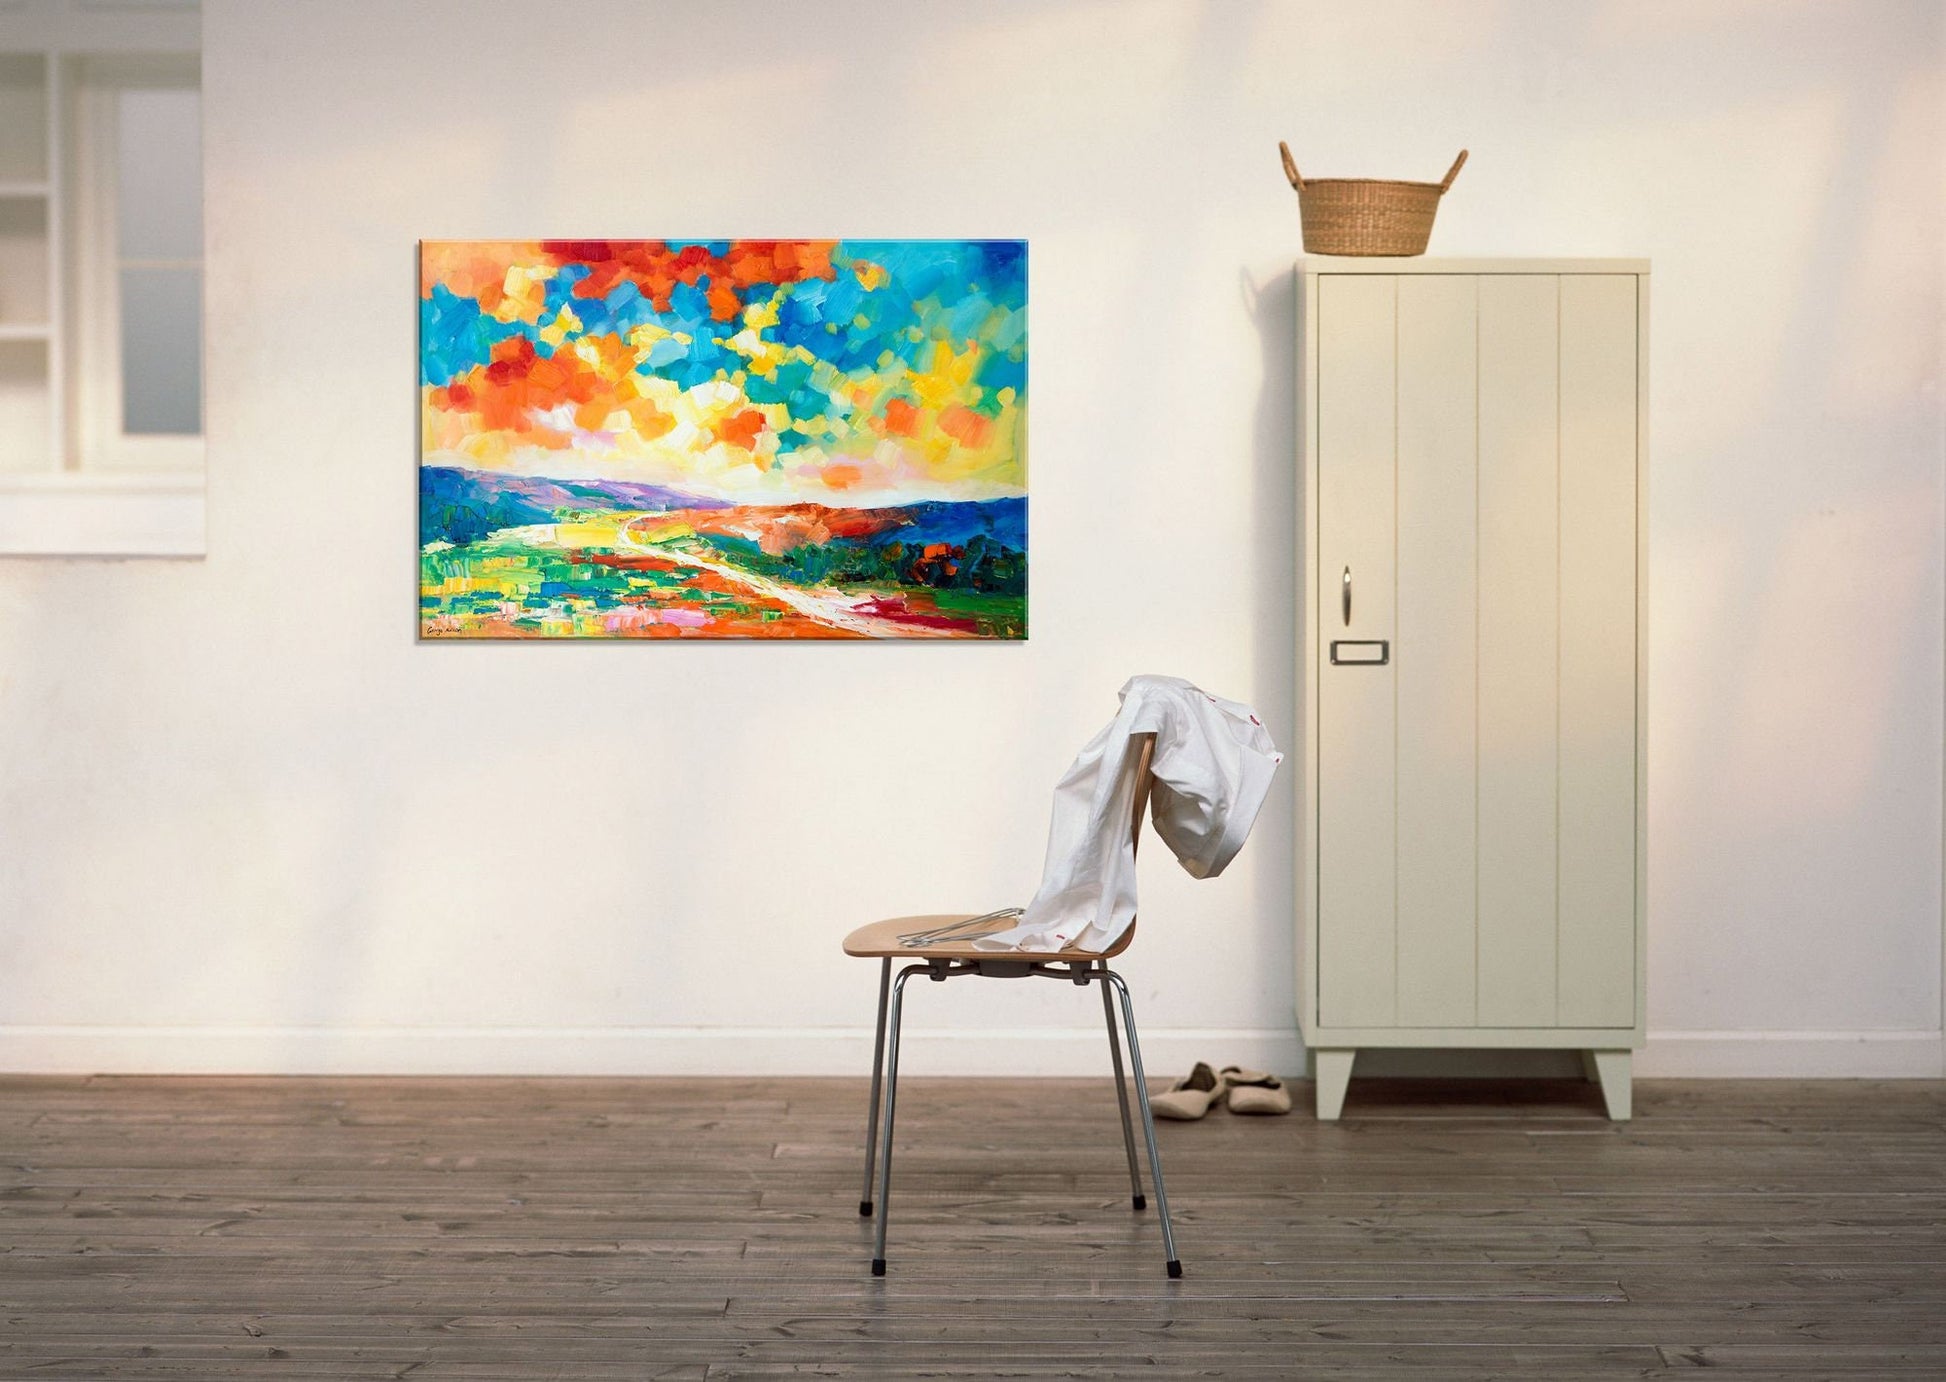 Oil Painting Spring Fields, Modern Painting, Oil Painting Landscape, Original Abstract Art, Wall Decor, Abstract Oil Painting, Canvas Art